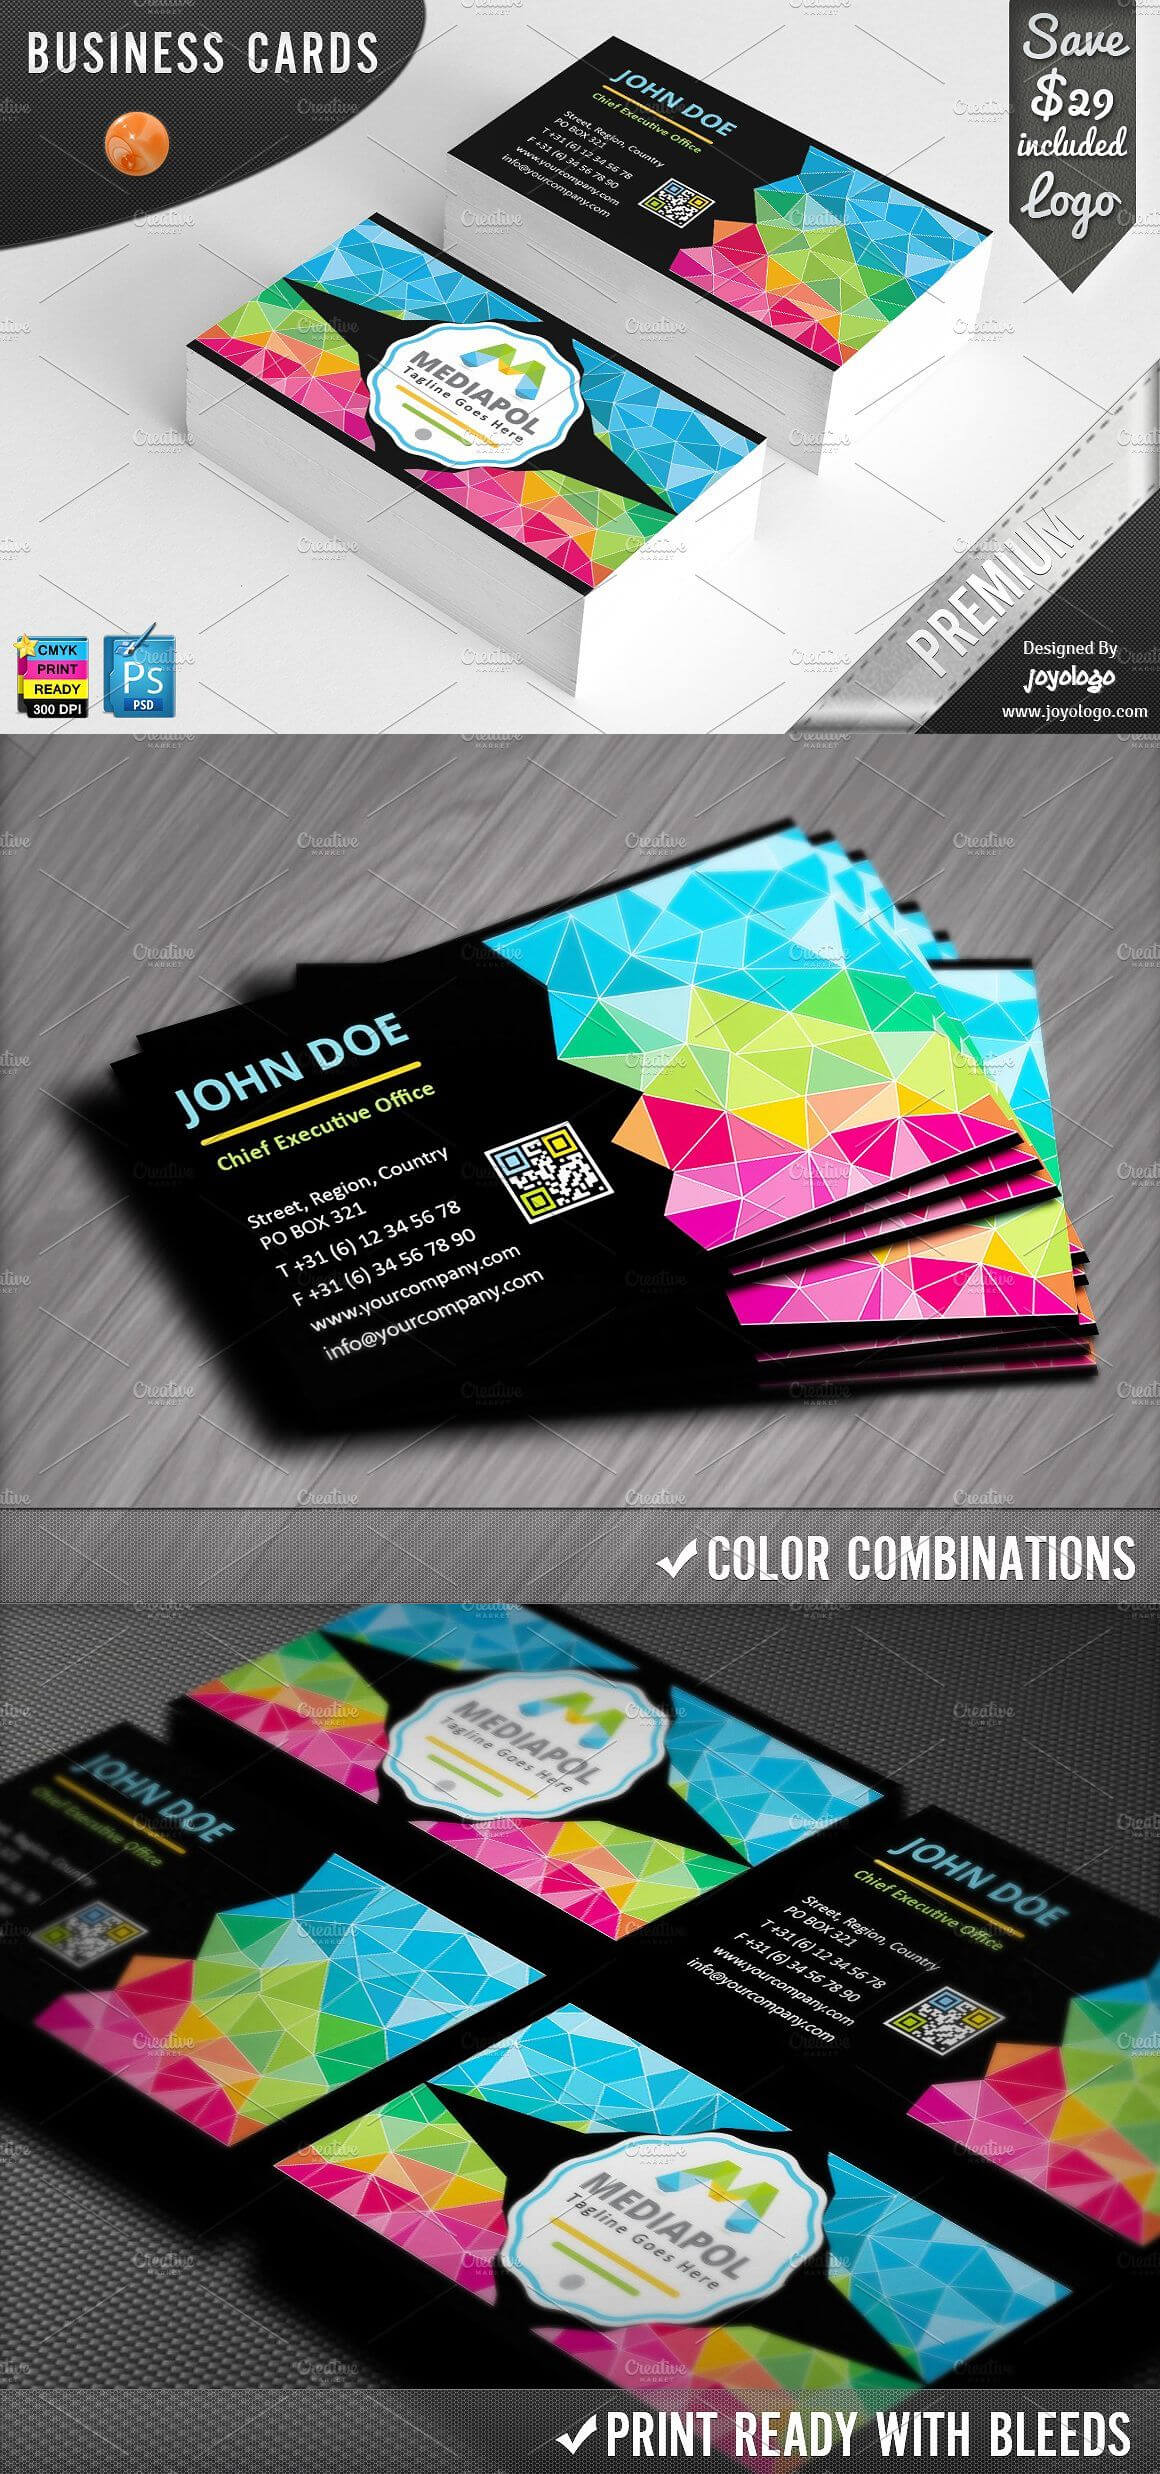 Colorful Geometric Business Cards Templates Psd | Business In Advertising Cards Templates